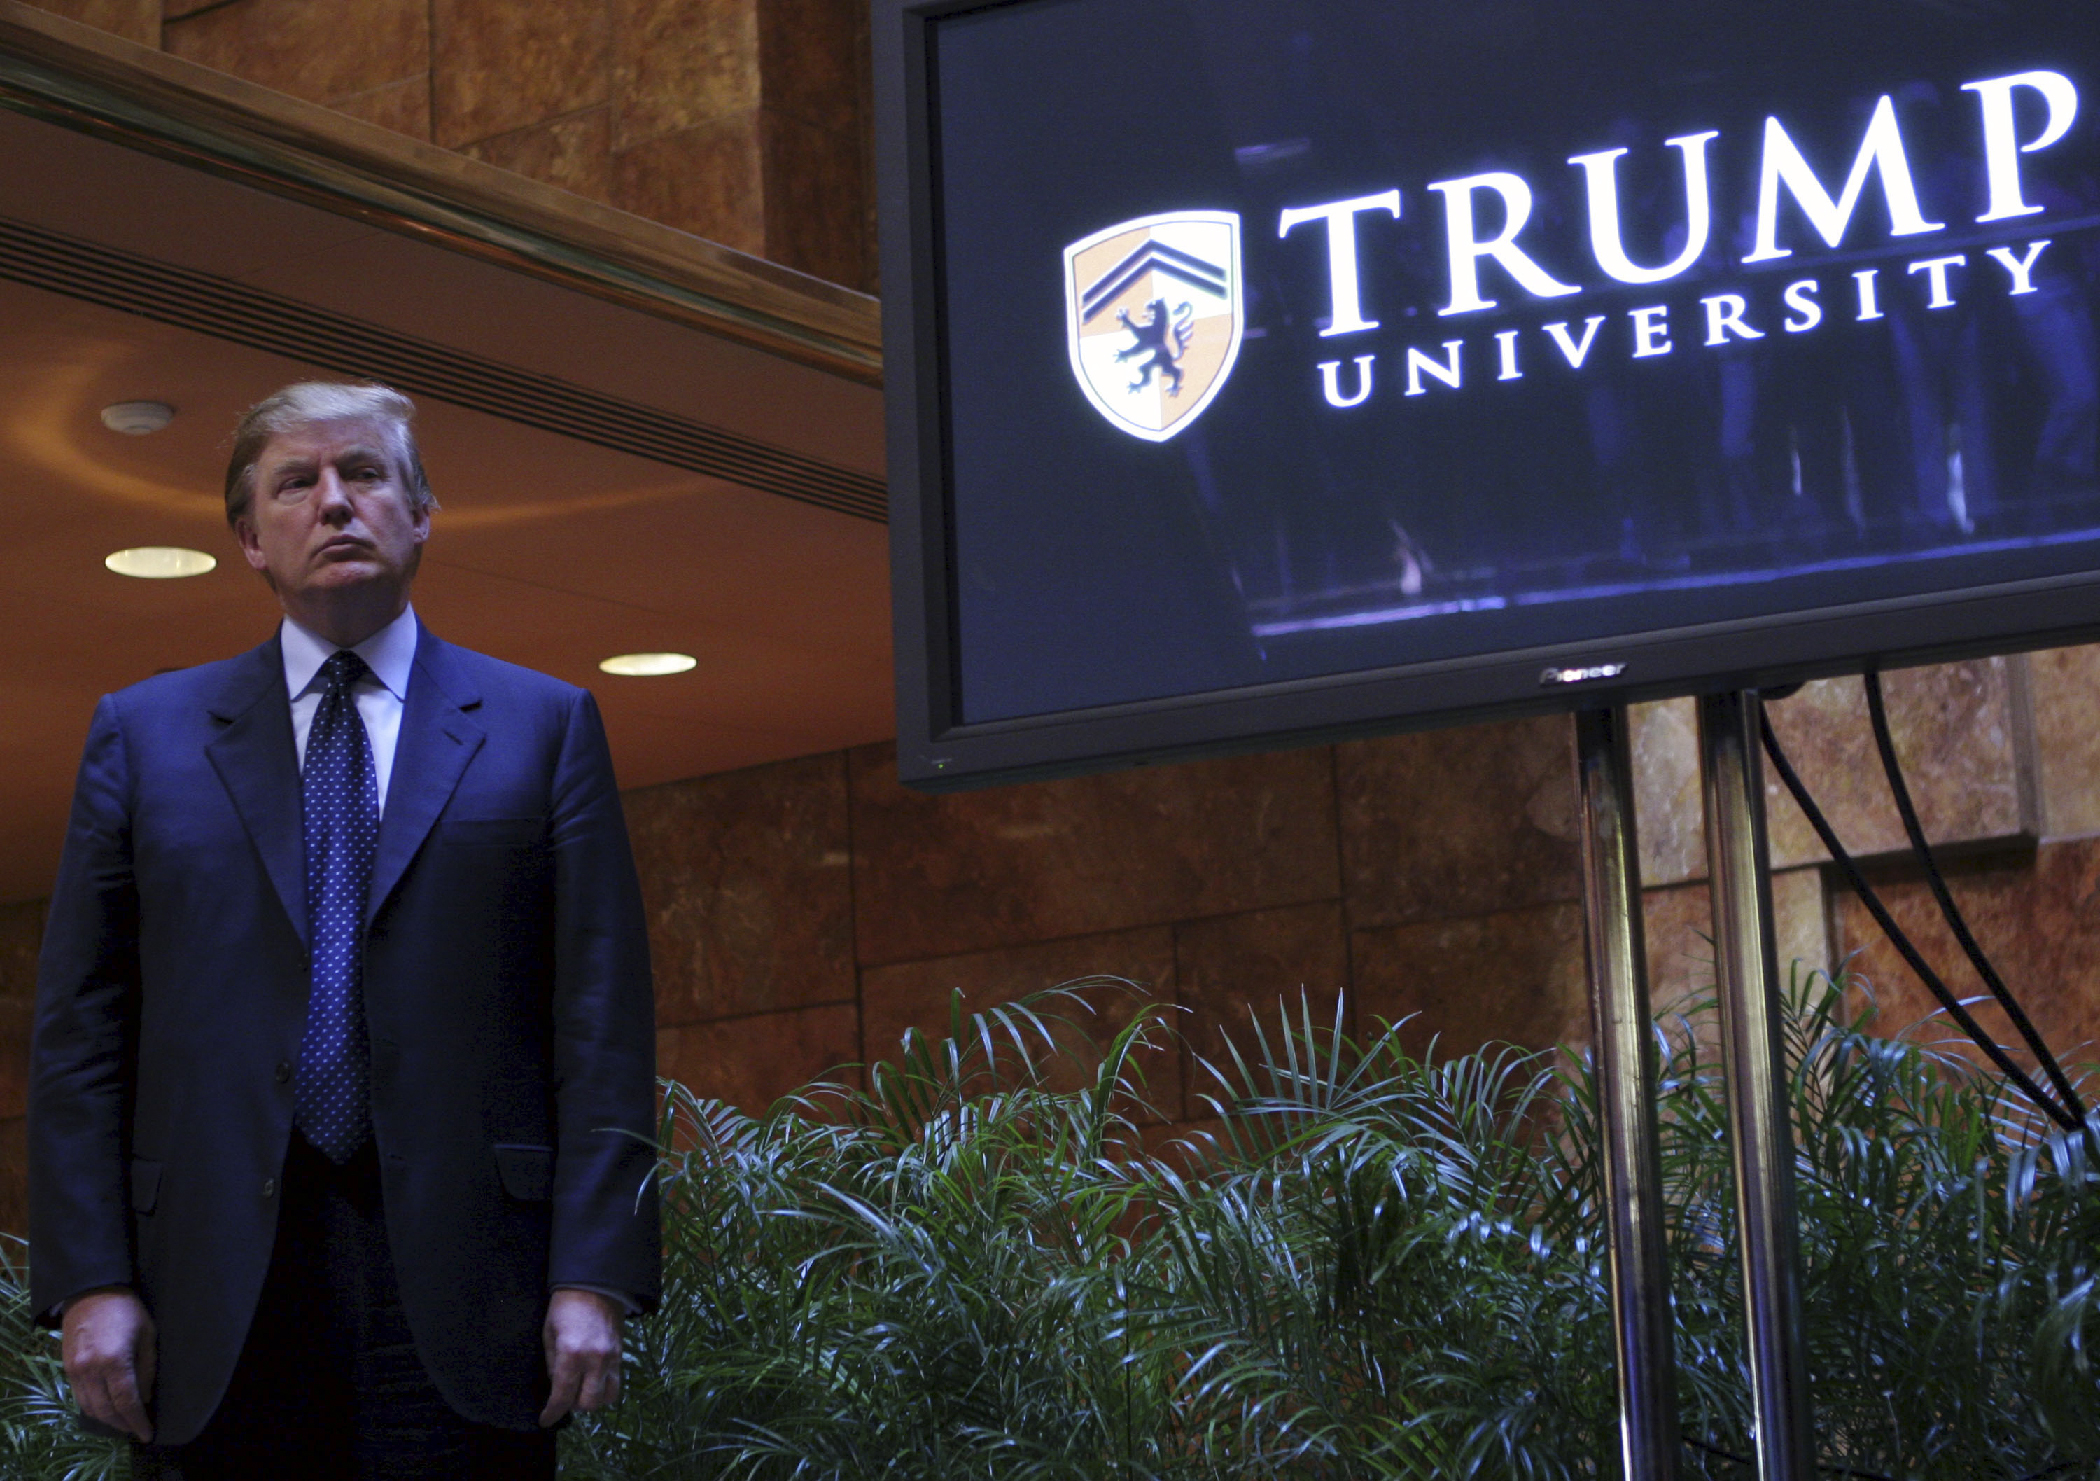 Donald Trump at a media conference announcing the establishment of Trump University, May 23, 2005 in New York City. (Getty Images) (Thos Robinson&mdash;Getty Images)